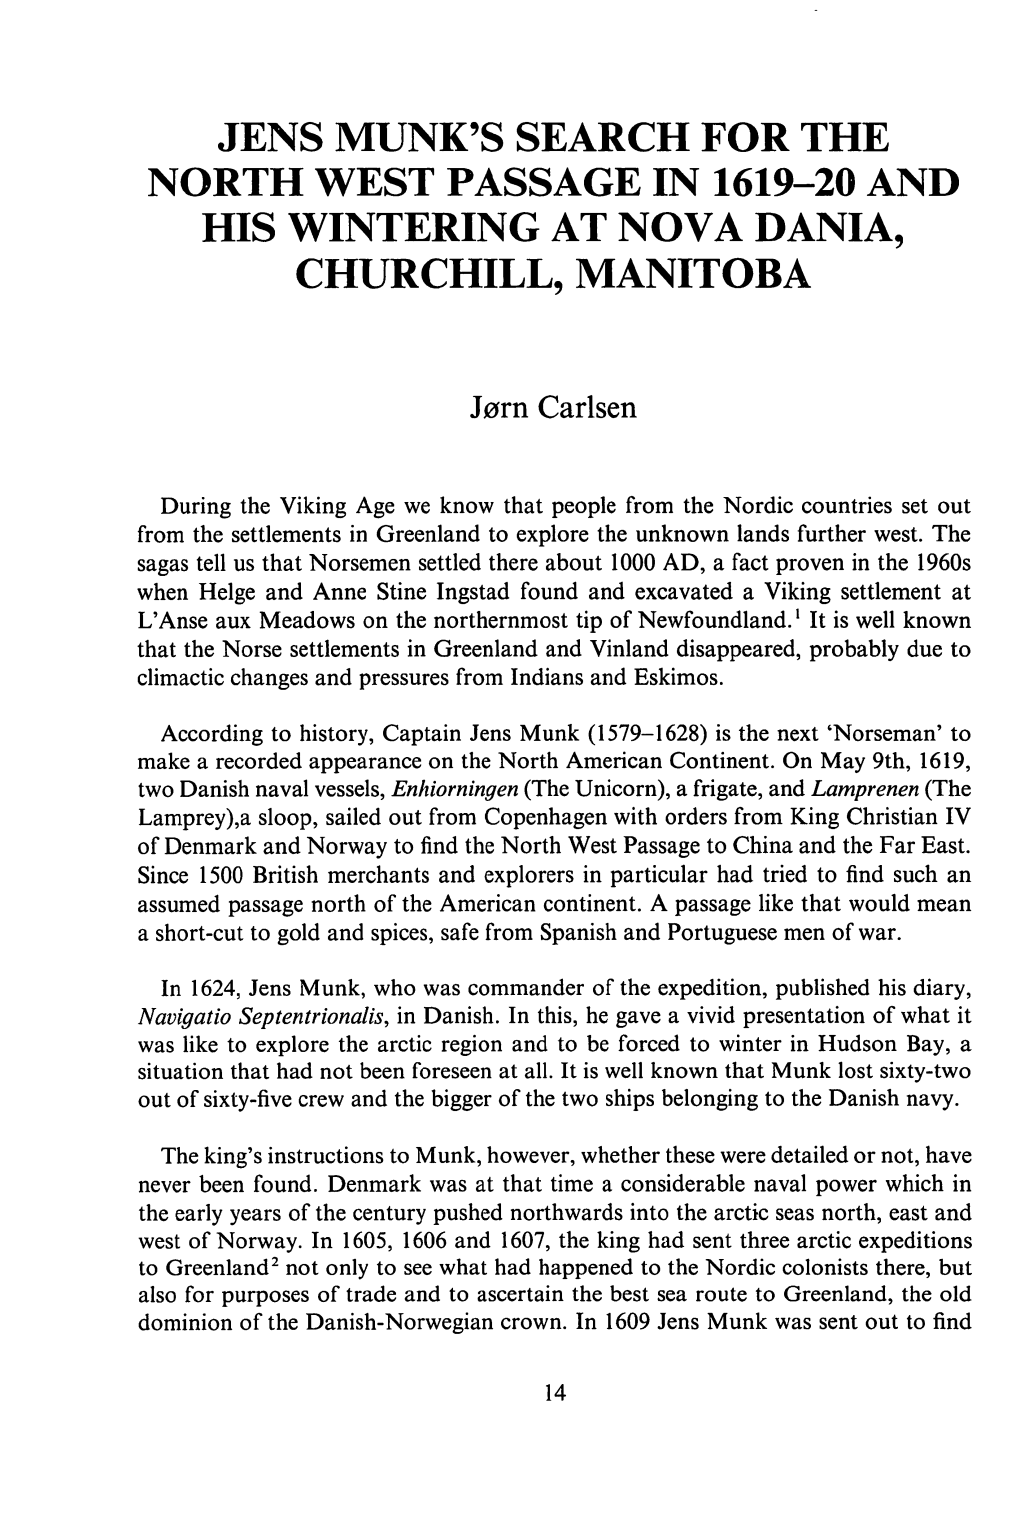 Jens Munk's Search for the North West Passage in 1619-20 and His Wintering at Nova Dania, Churchill, Manitoba